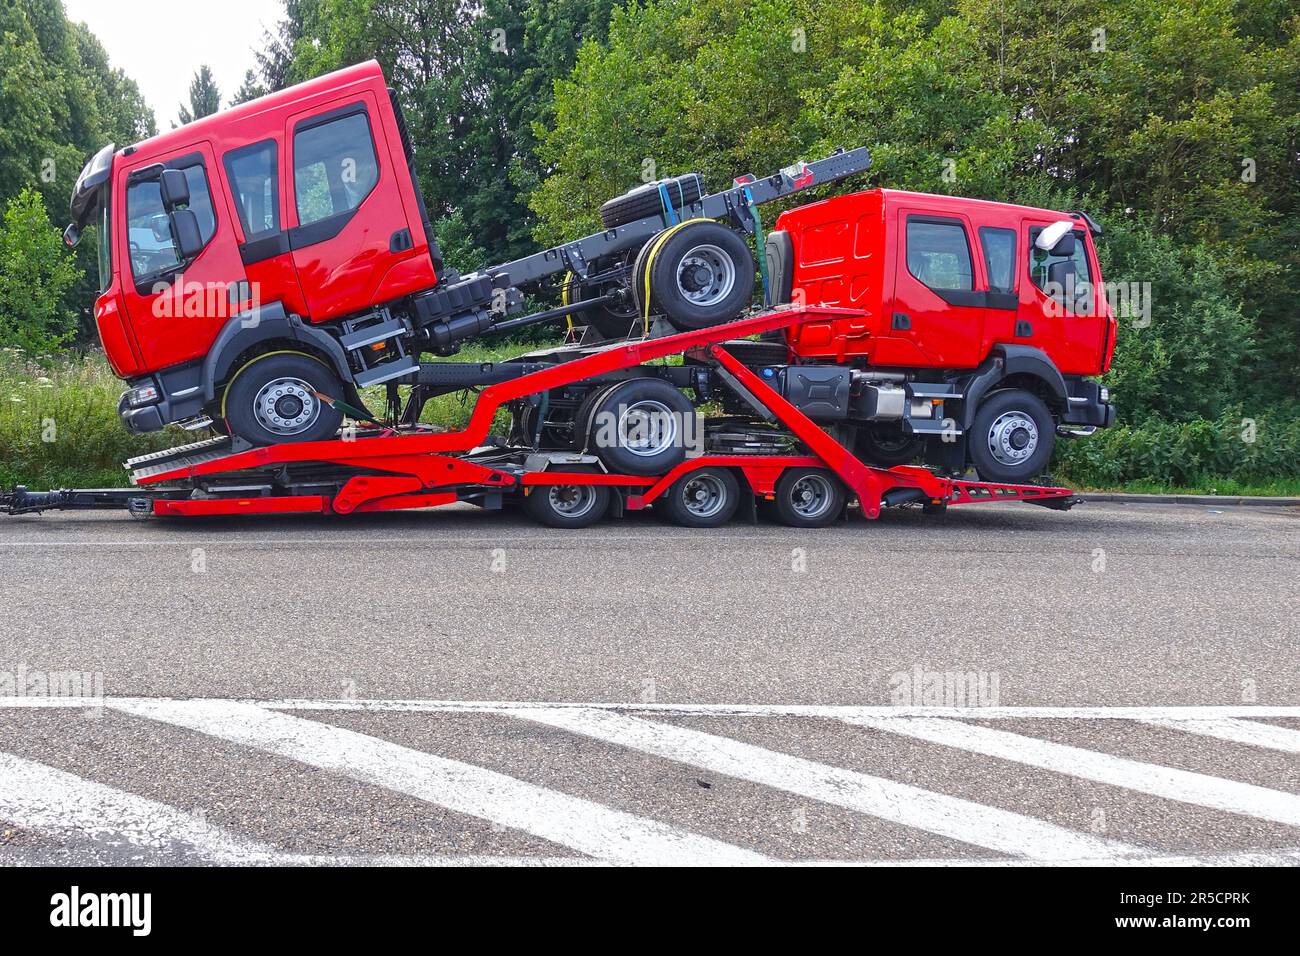 Truck carrier trailer transporting two brand-new trucks of red color. Stock Photo